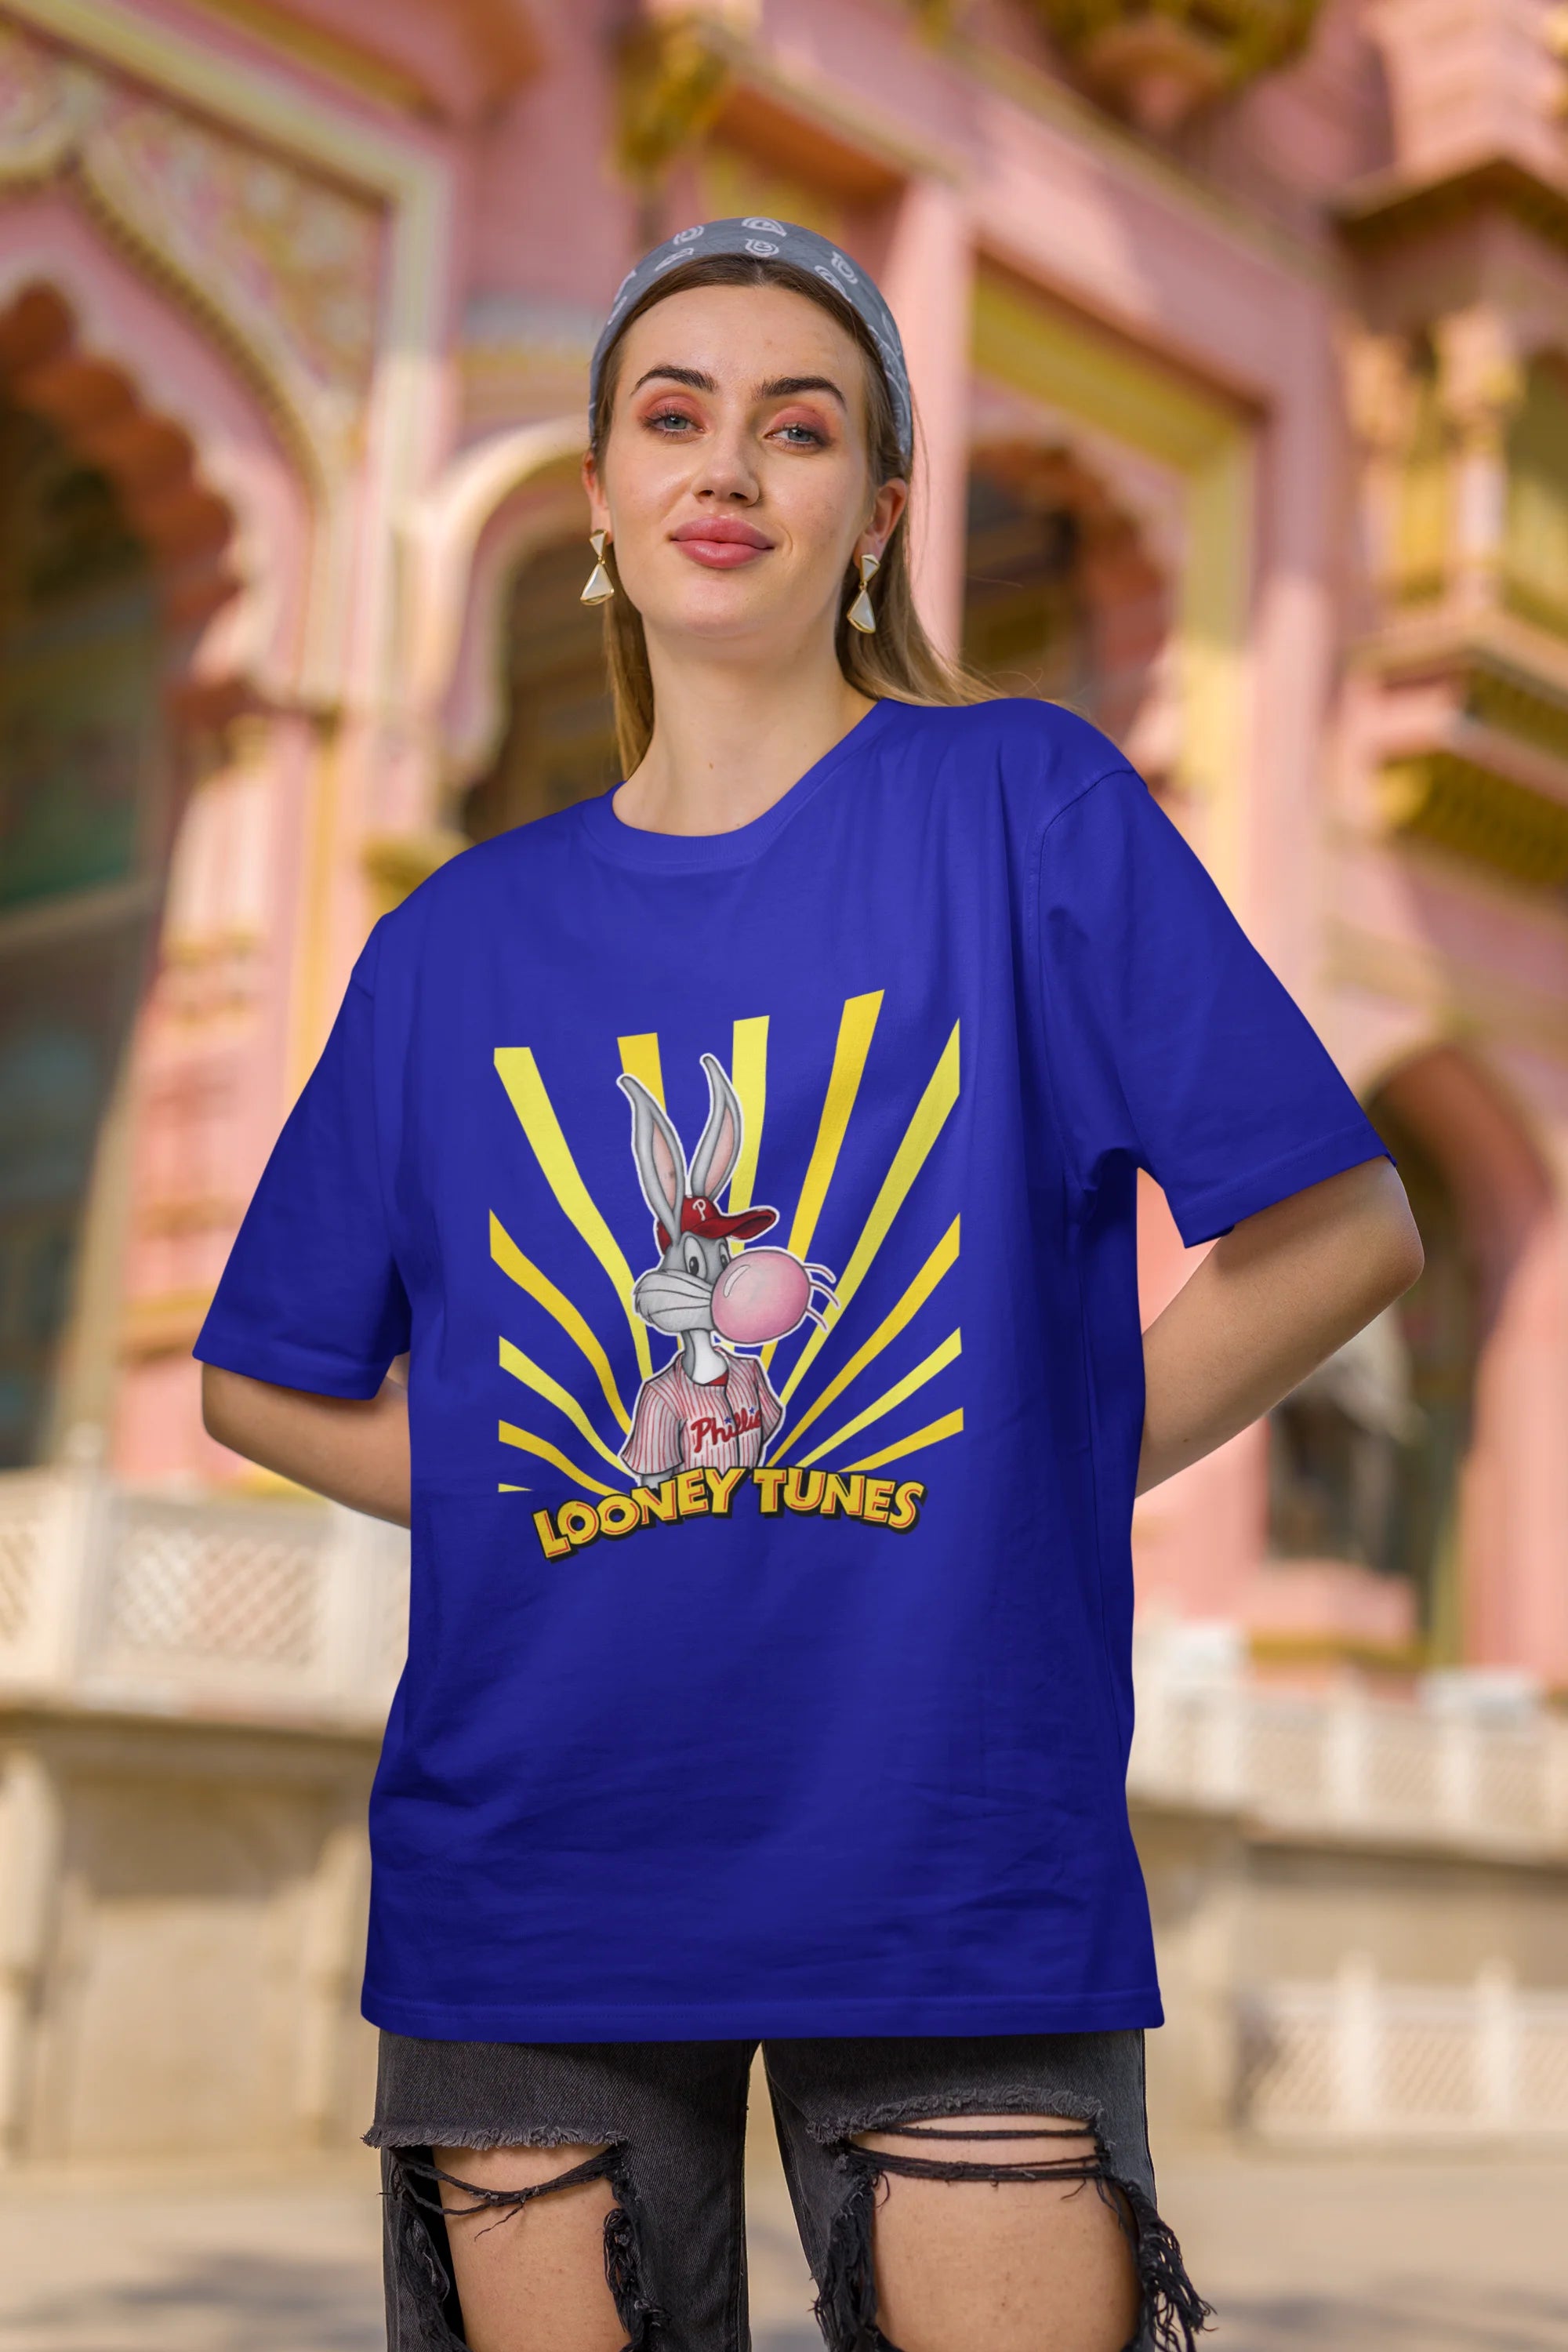 Second image of female Model showcasing blue Bugs Bunny oversize t-shirt from Looney Tunes, featuring a bold Bugs Bunny design